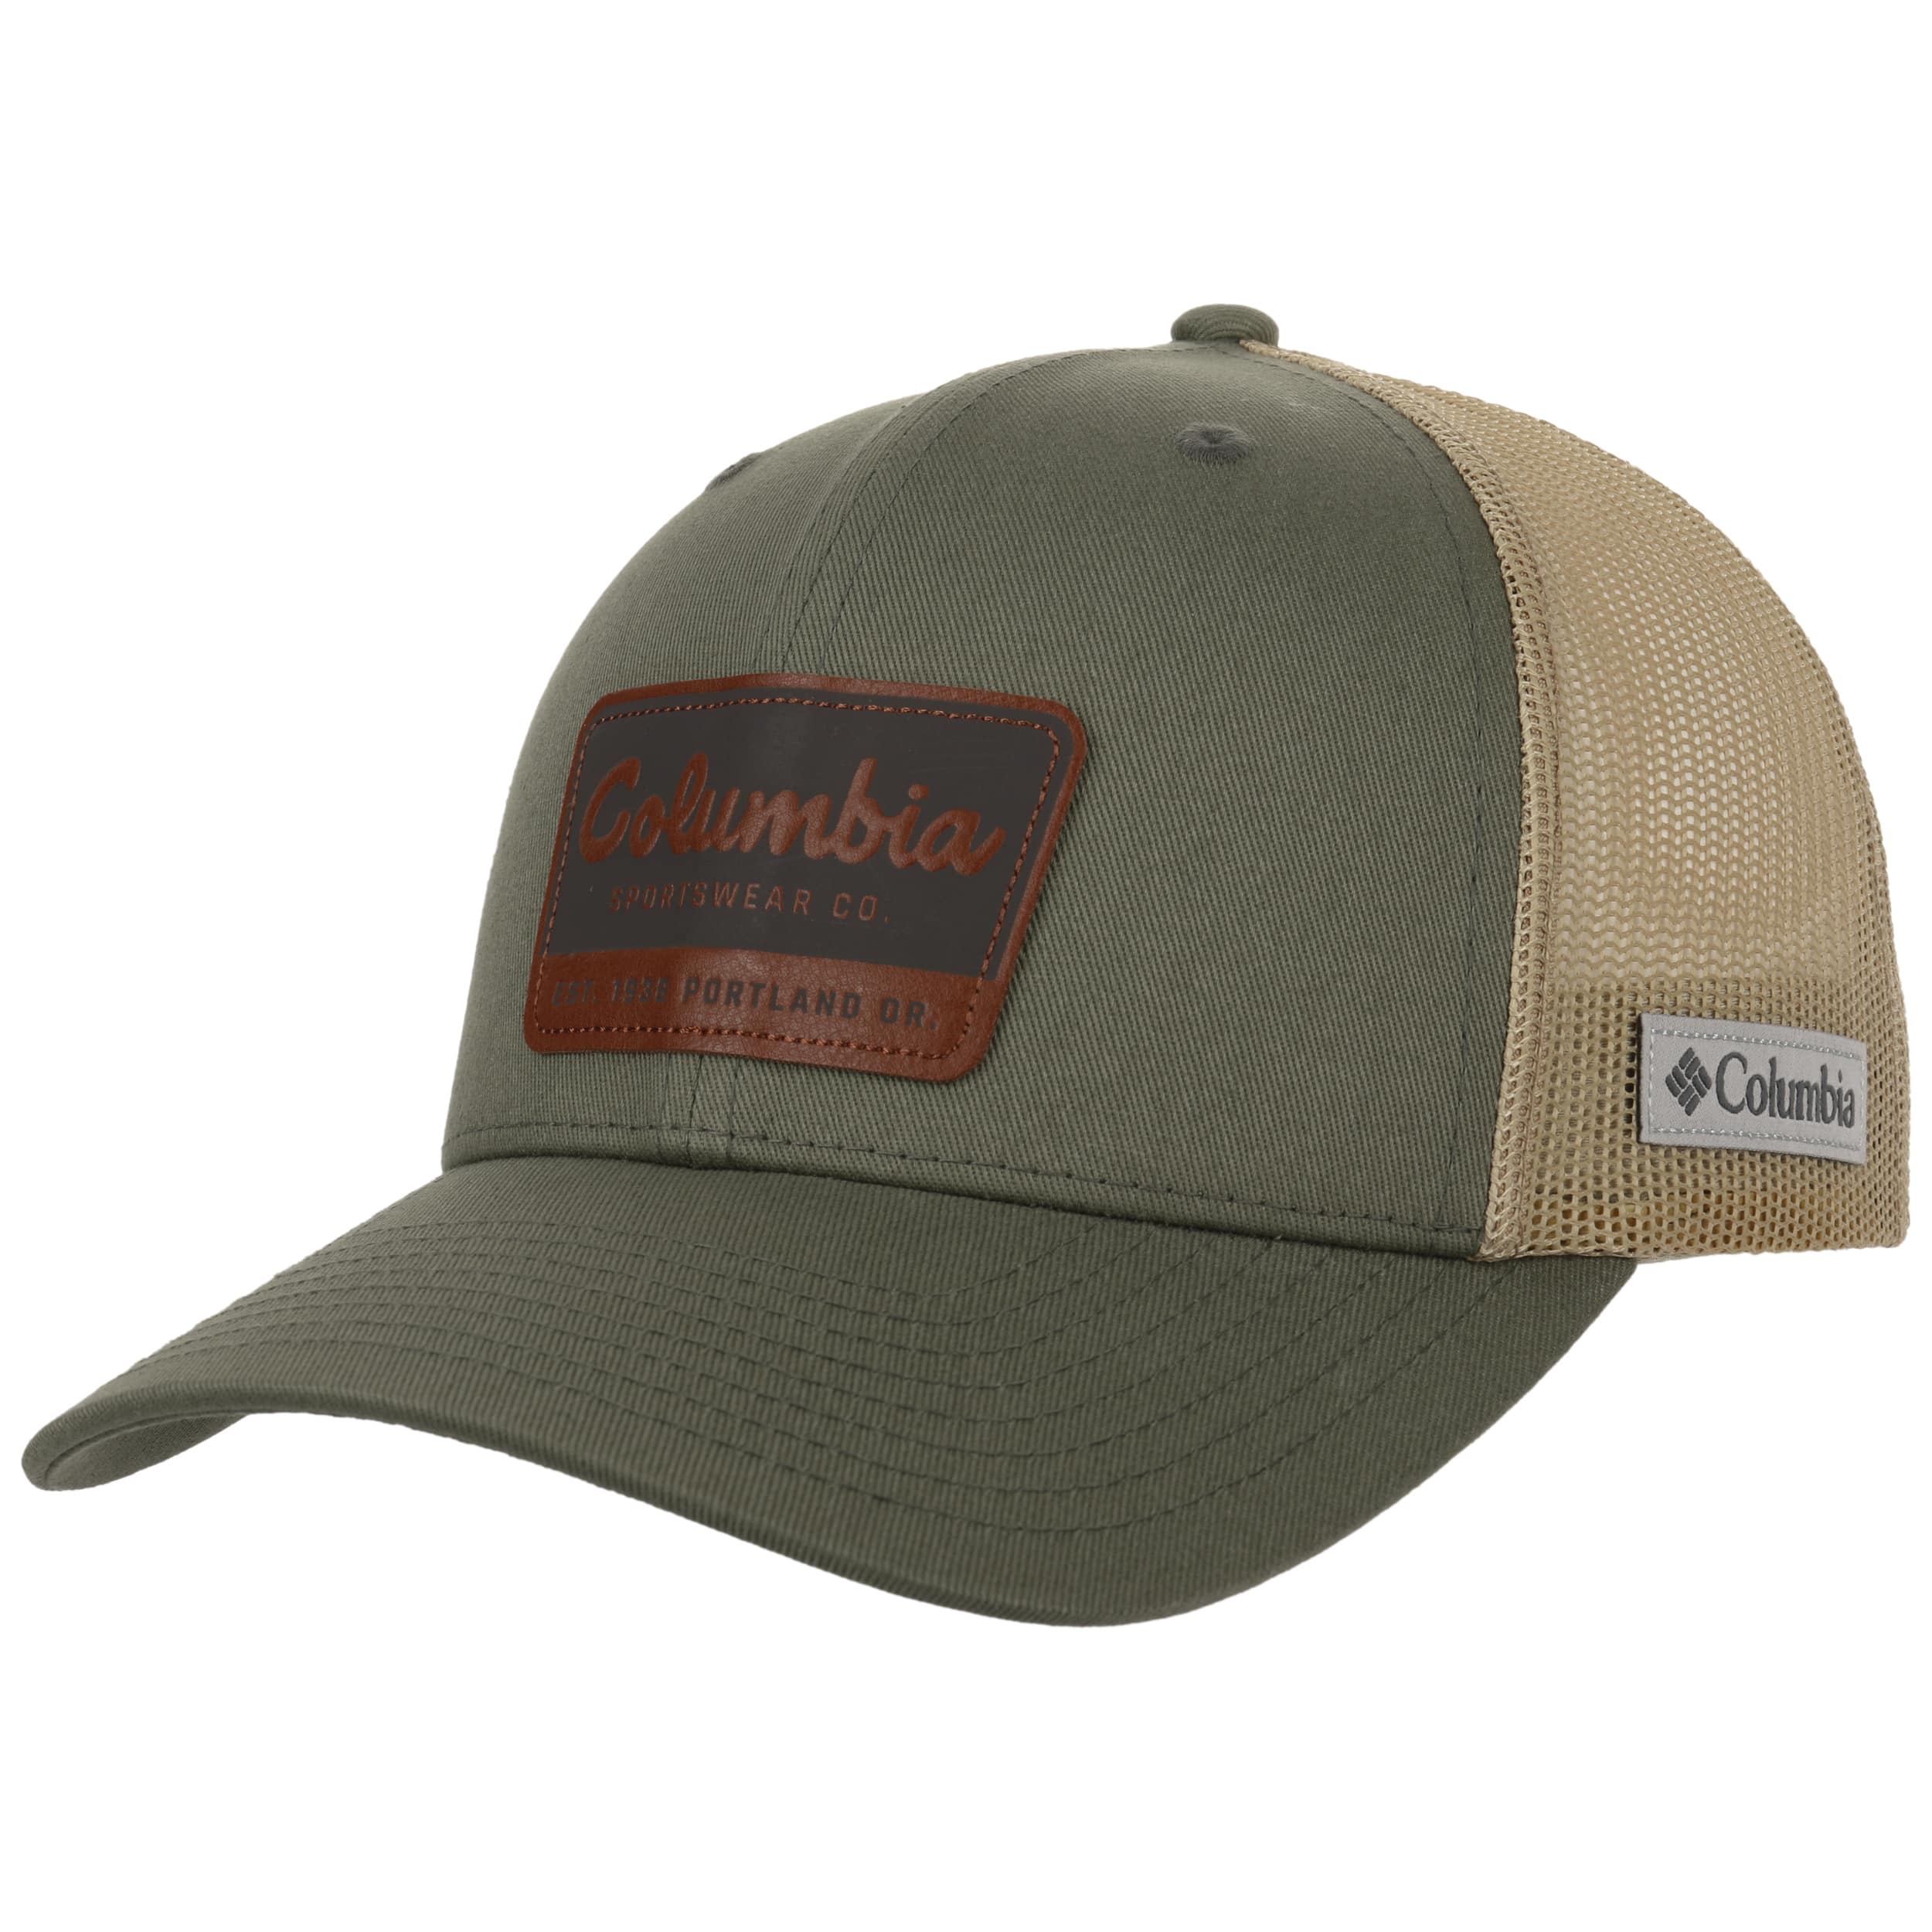 Rugged Outdoor Cap by Columbia